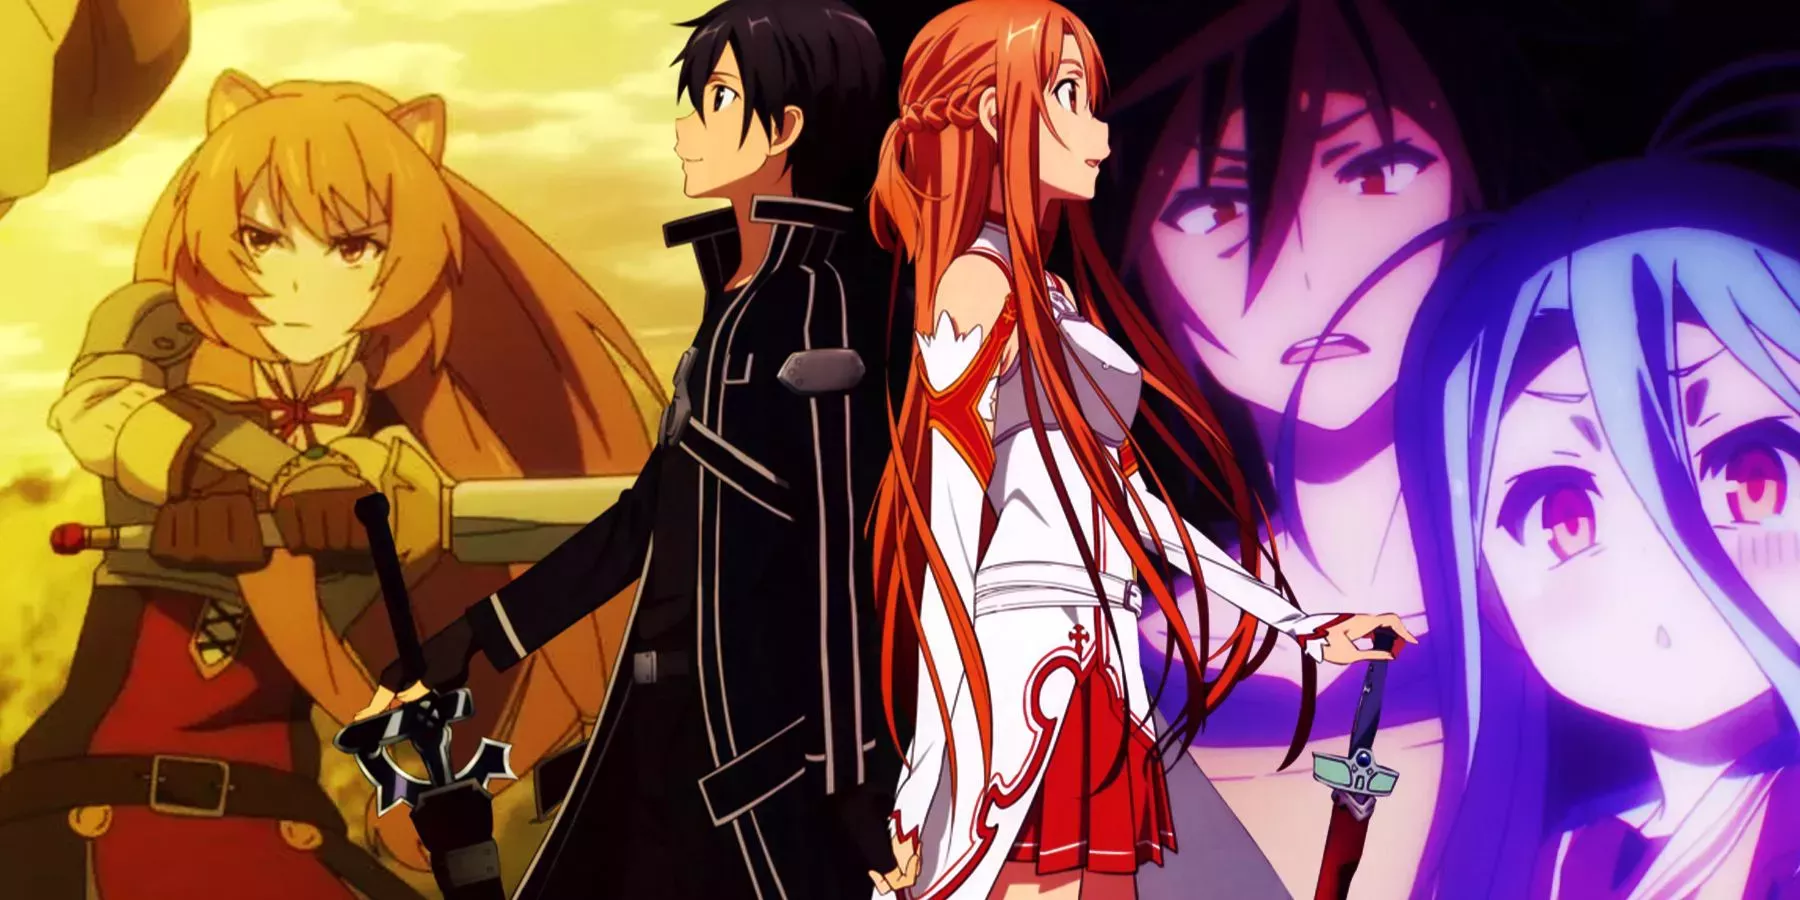 In the middle, of Sword Art Online stand back to back. On the left, Raphtalia from Rising of the Shield Hero defends prepares to swing her sword. On the right, Sora and Shiro of No Game No Life look surprised. 